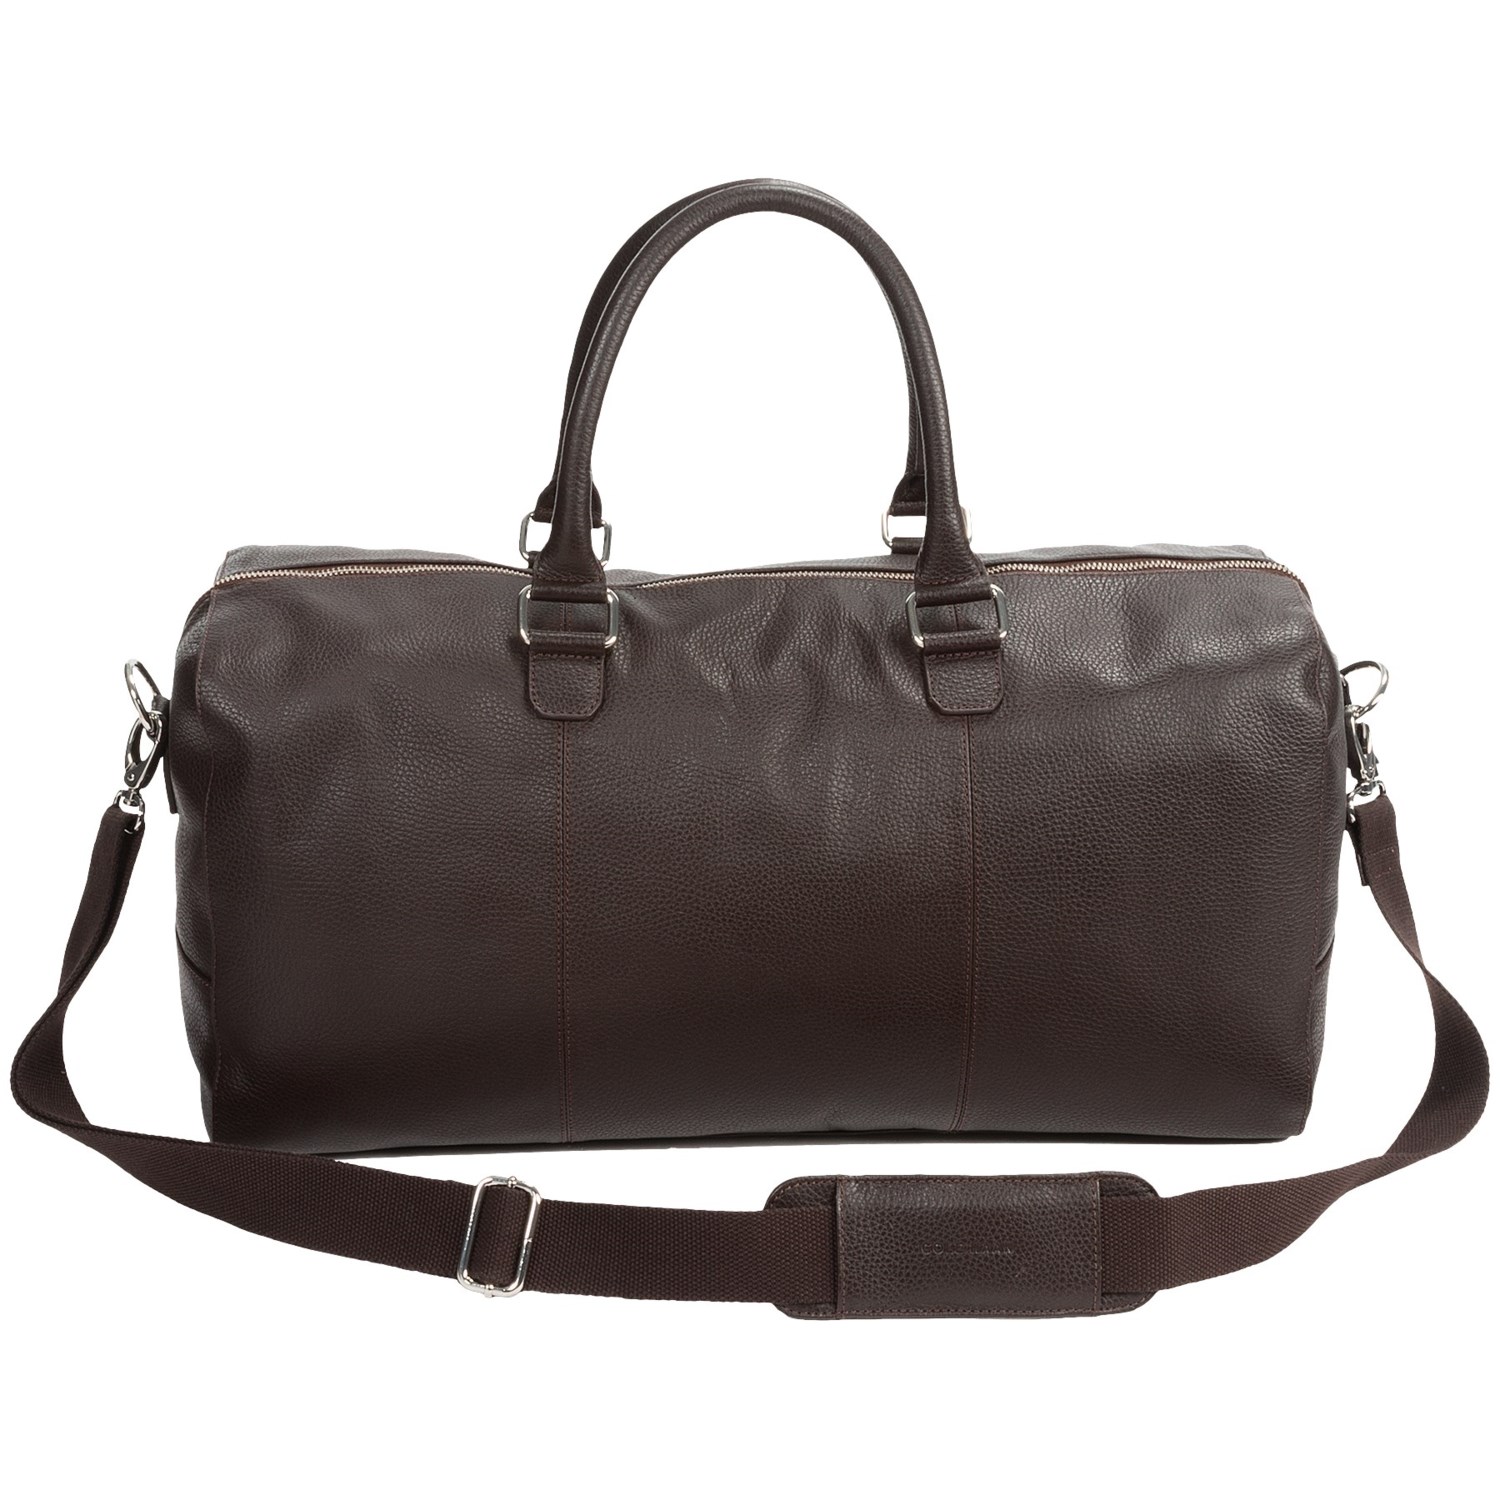 Cole Haan Pebbled Leather Duffel Bag - Save 65%